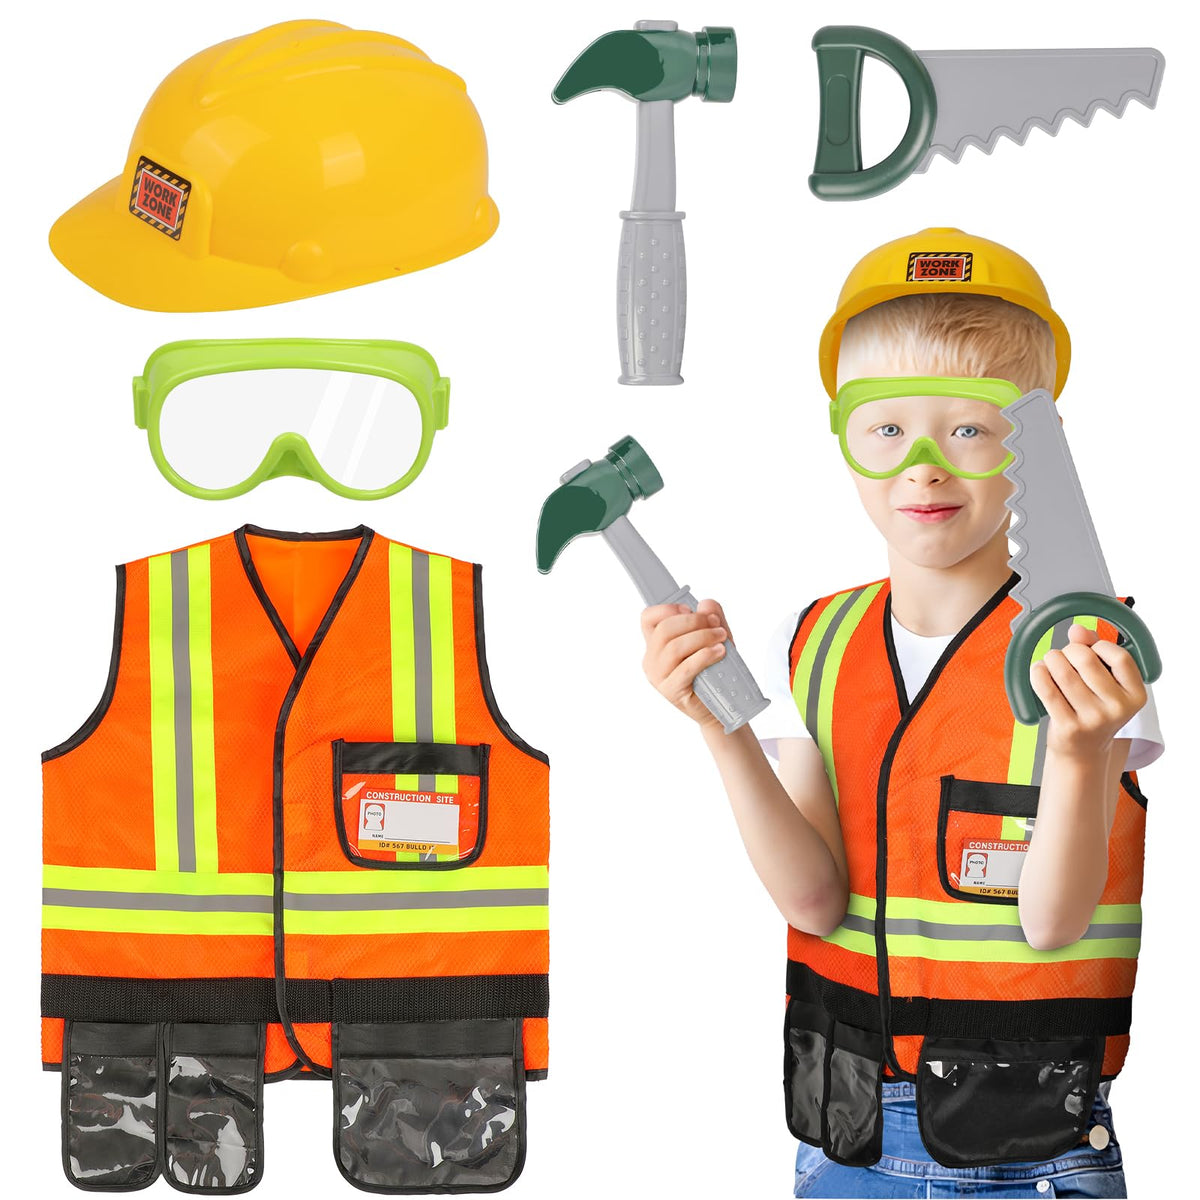 Popsunny Toy Construction Worker for Toddlers, Kids Tool Dress up with Costume, Hat, Pretend Play Gift for Boys 3-6 Years